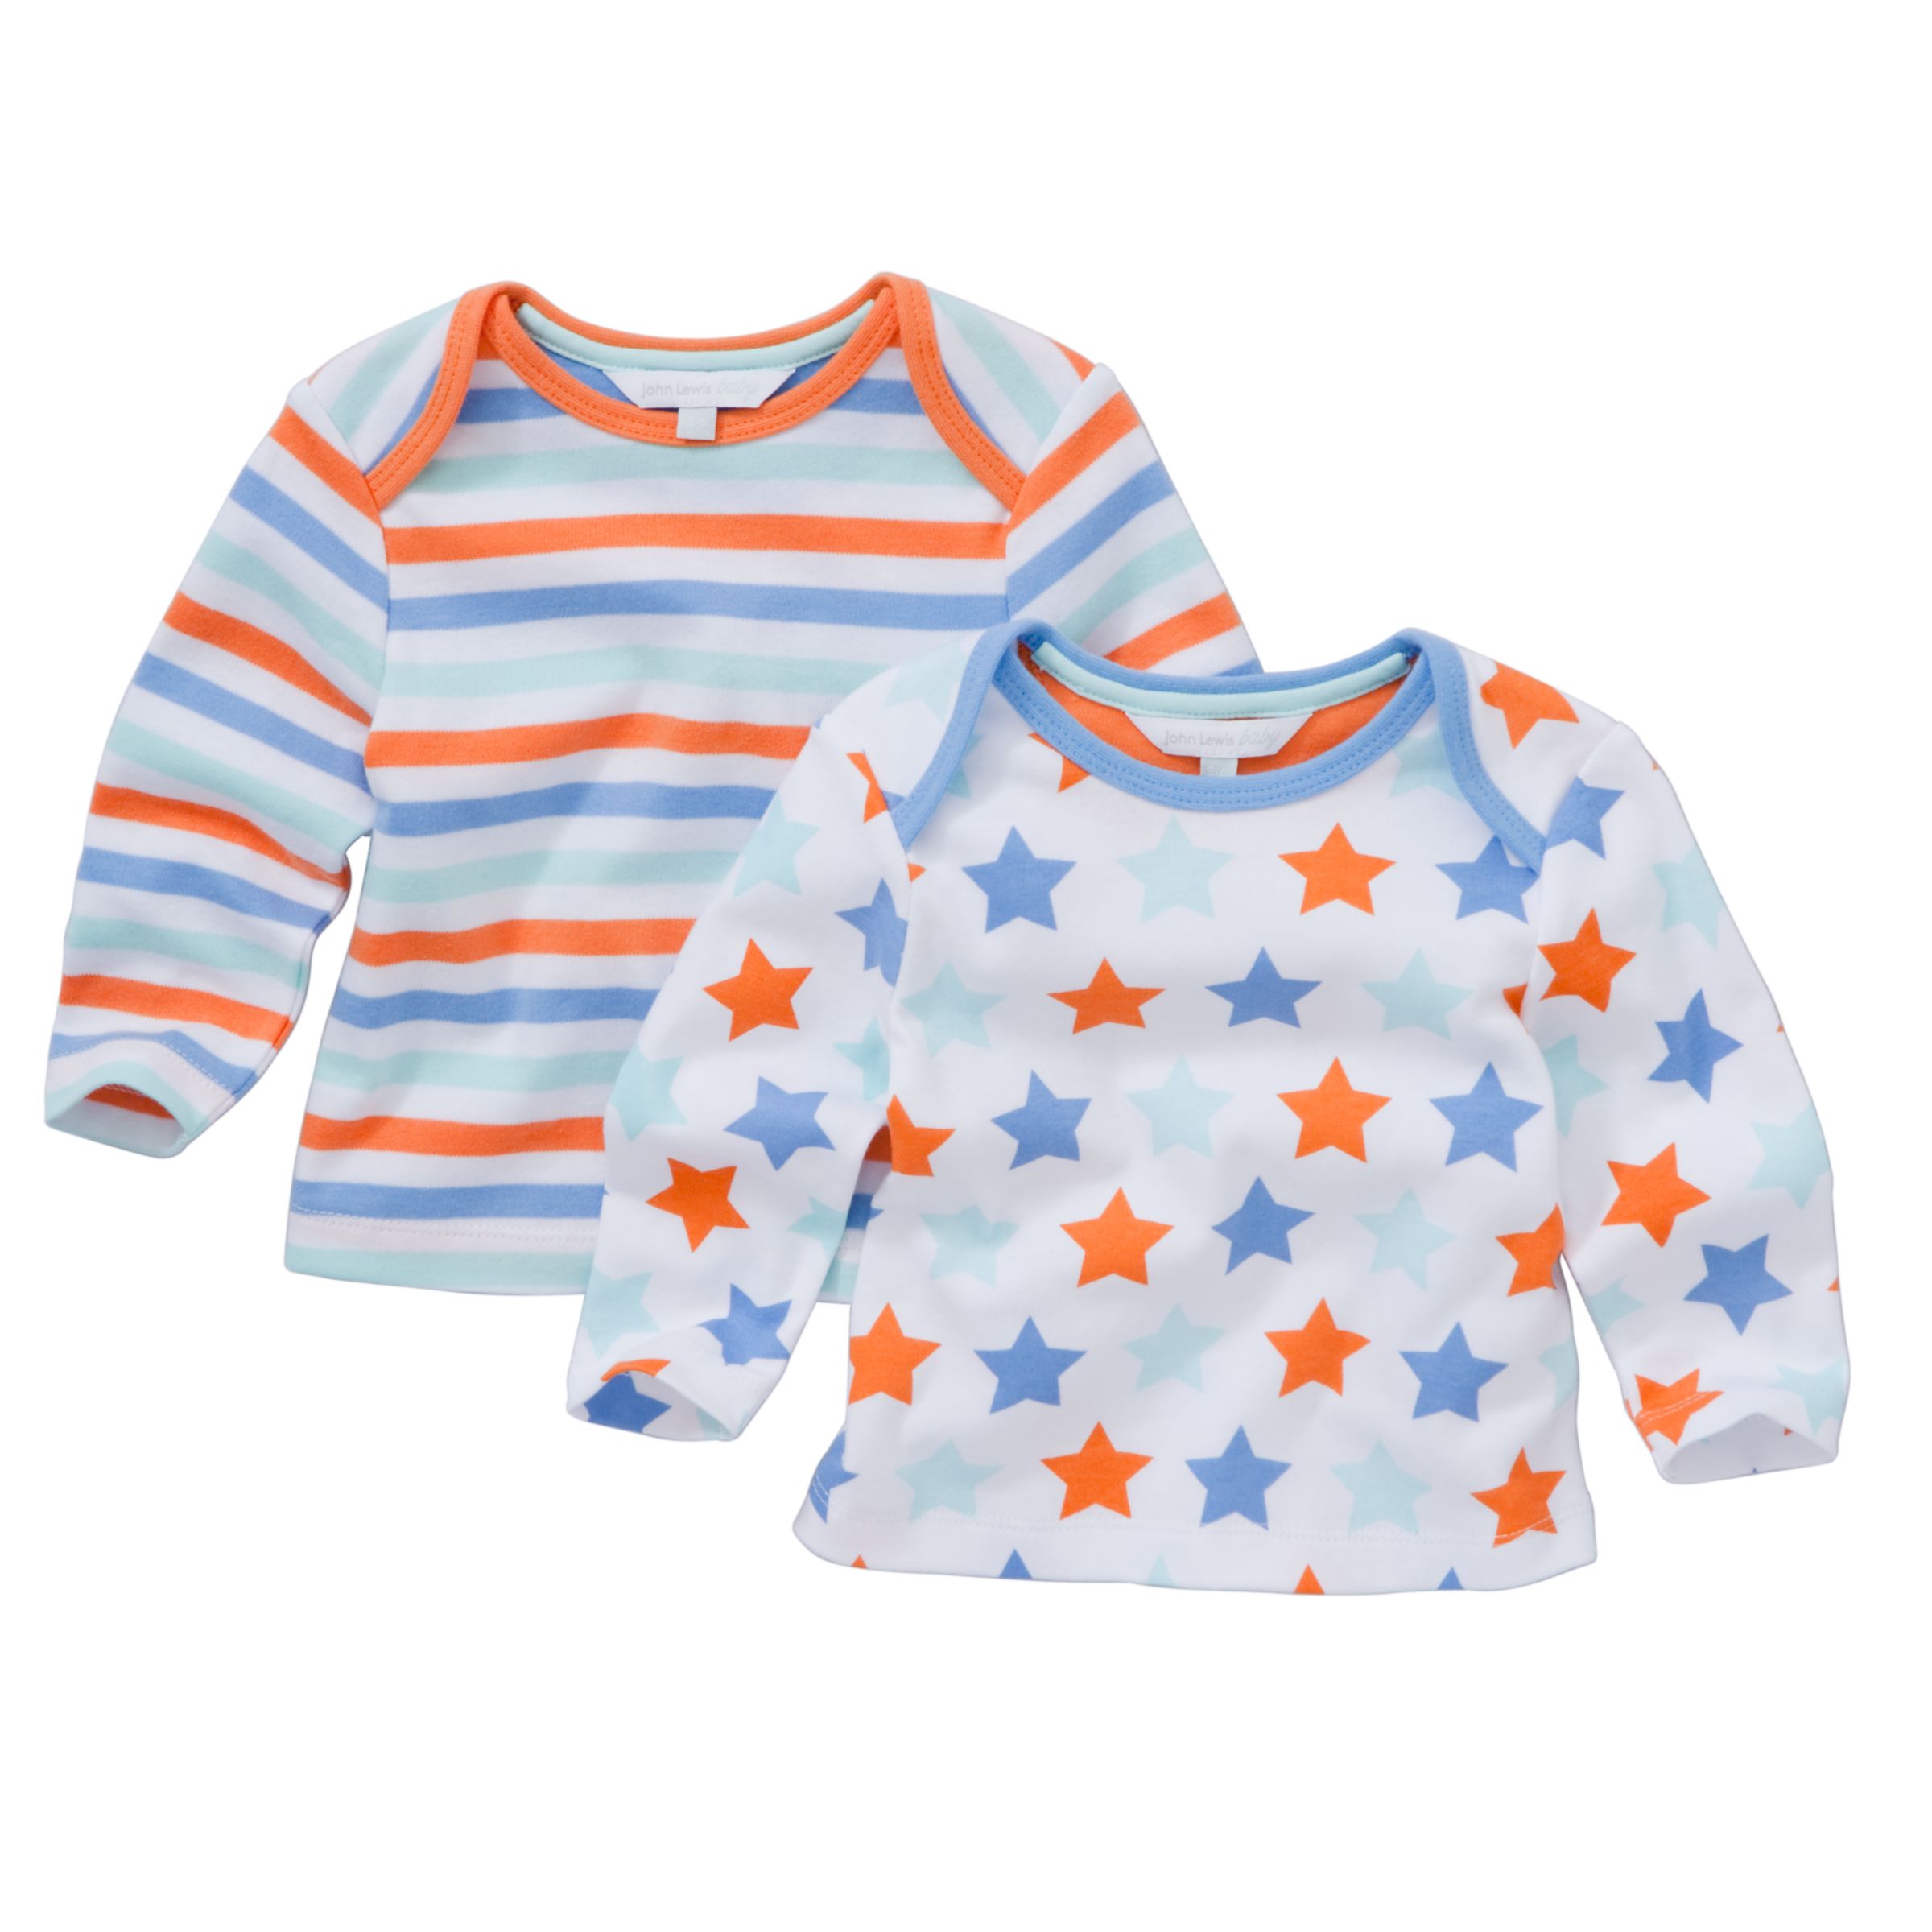 John Lewis Baby Stars and Stripes T-Shirts, Pack